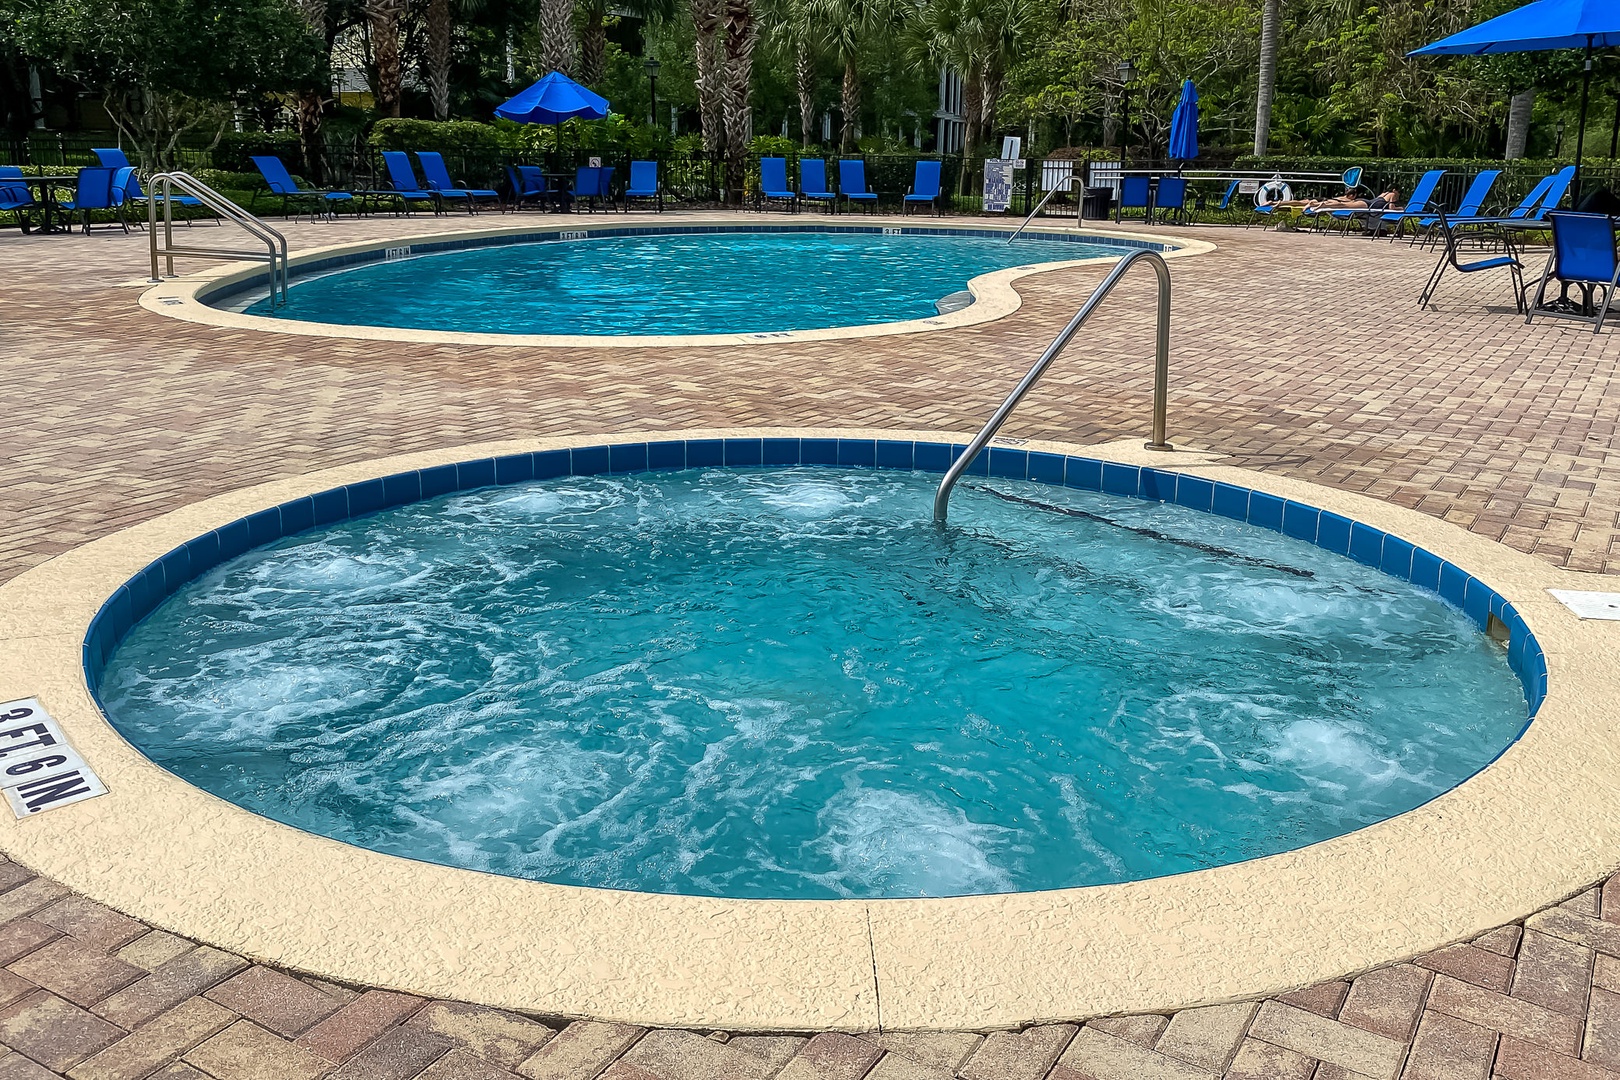 Community pools and hot tubs